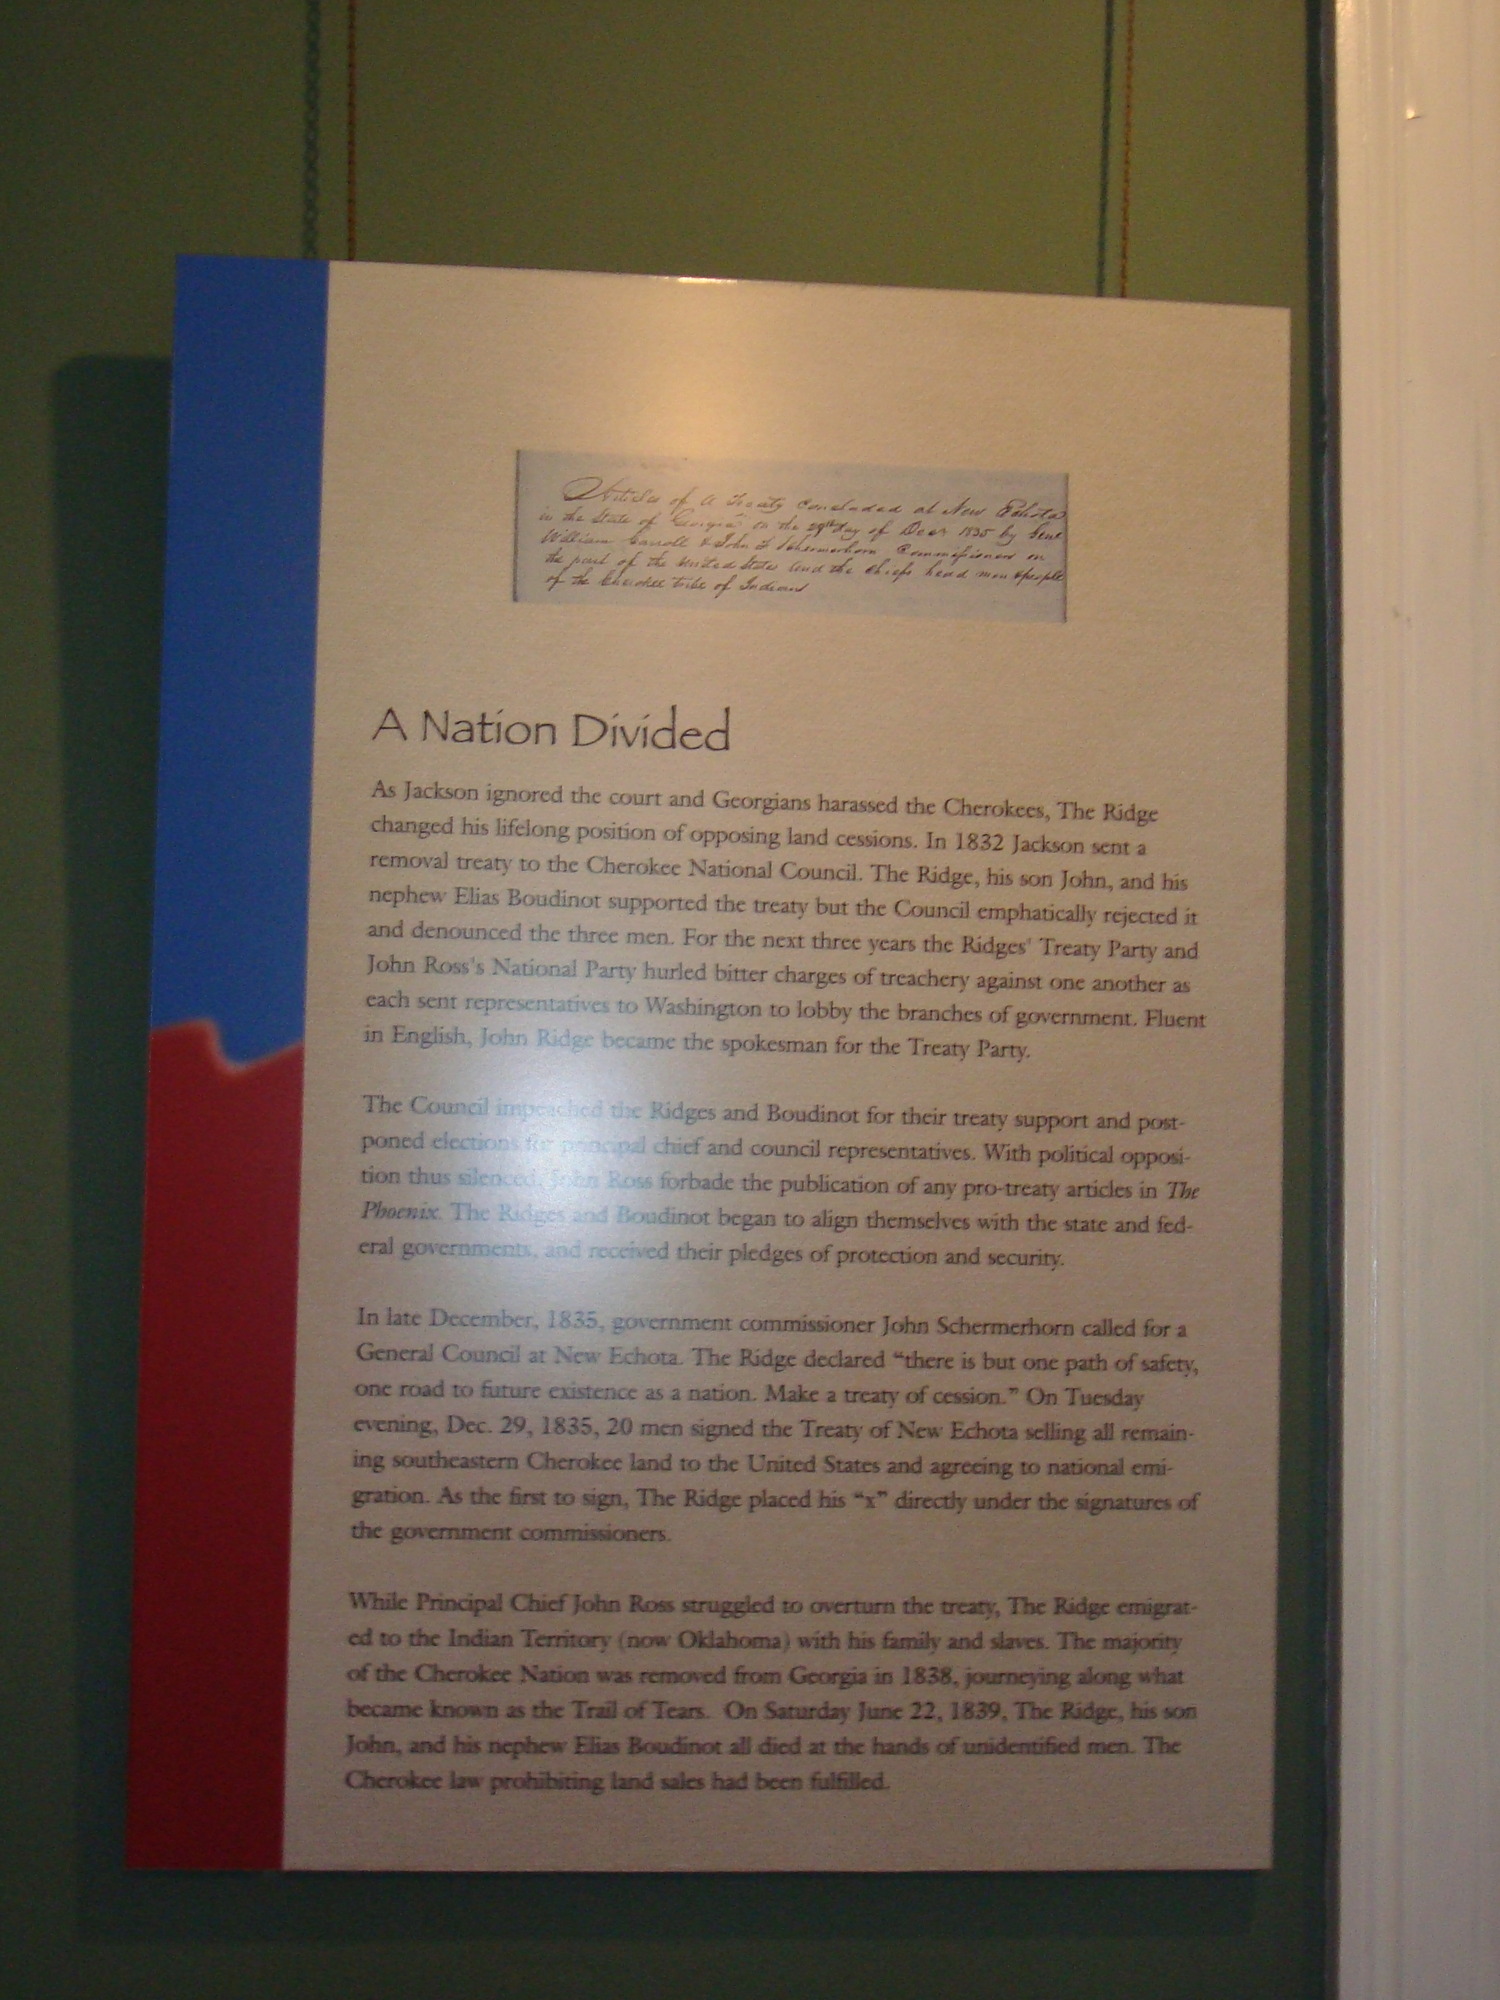 A Nation Divided exhibit panel side view at the Chieftains Museum, Major Ridge Home in Rome, Georgia